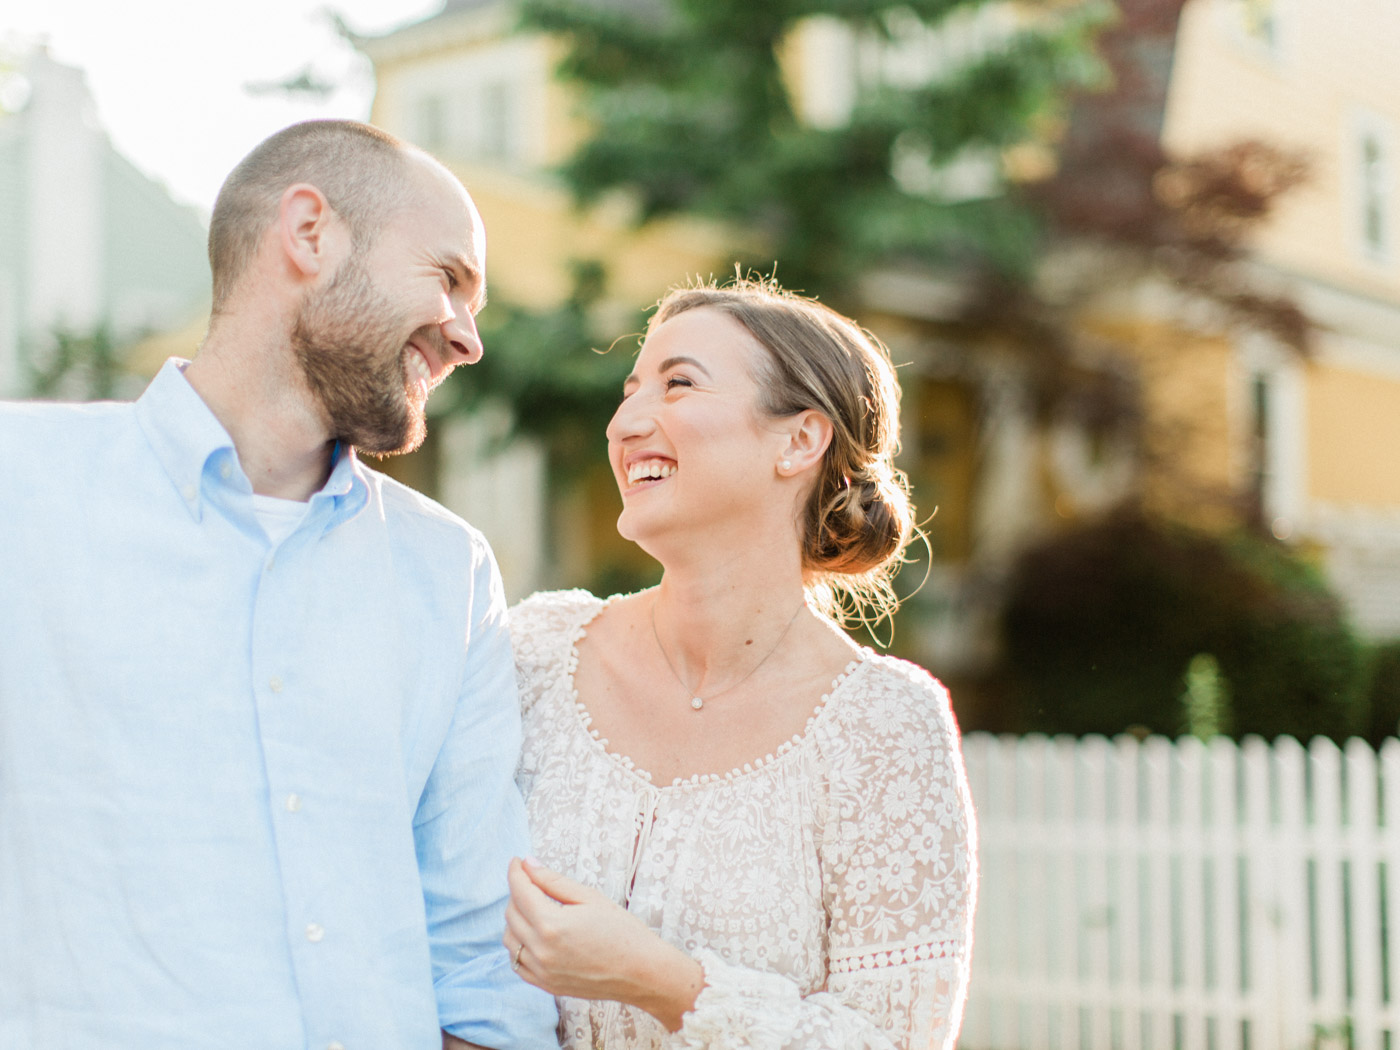 Sunny engagement photographs from niagara on the lake, by toronto wedding photographer corynn fowler photography